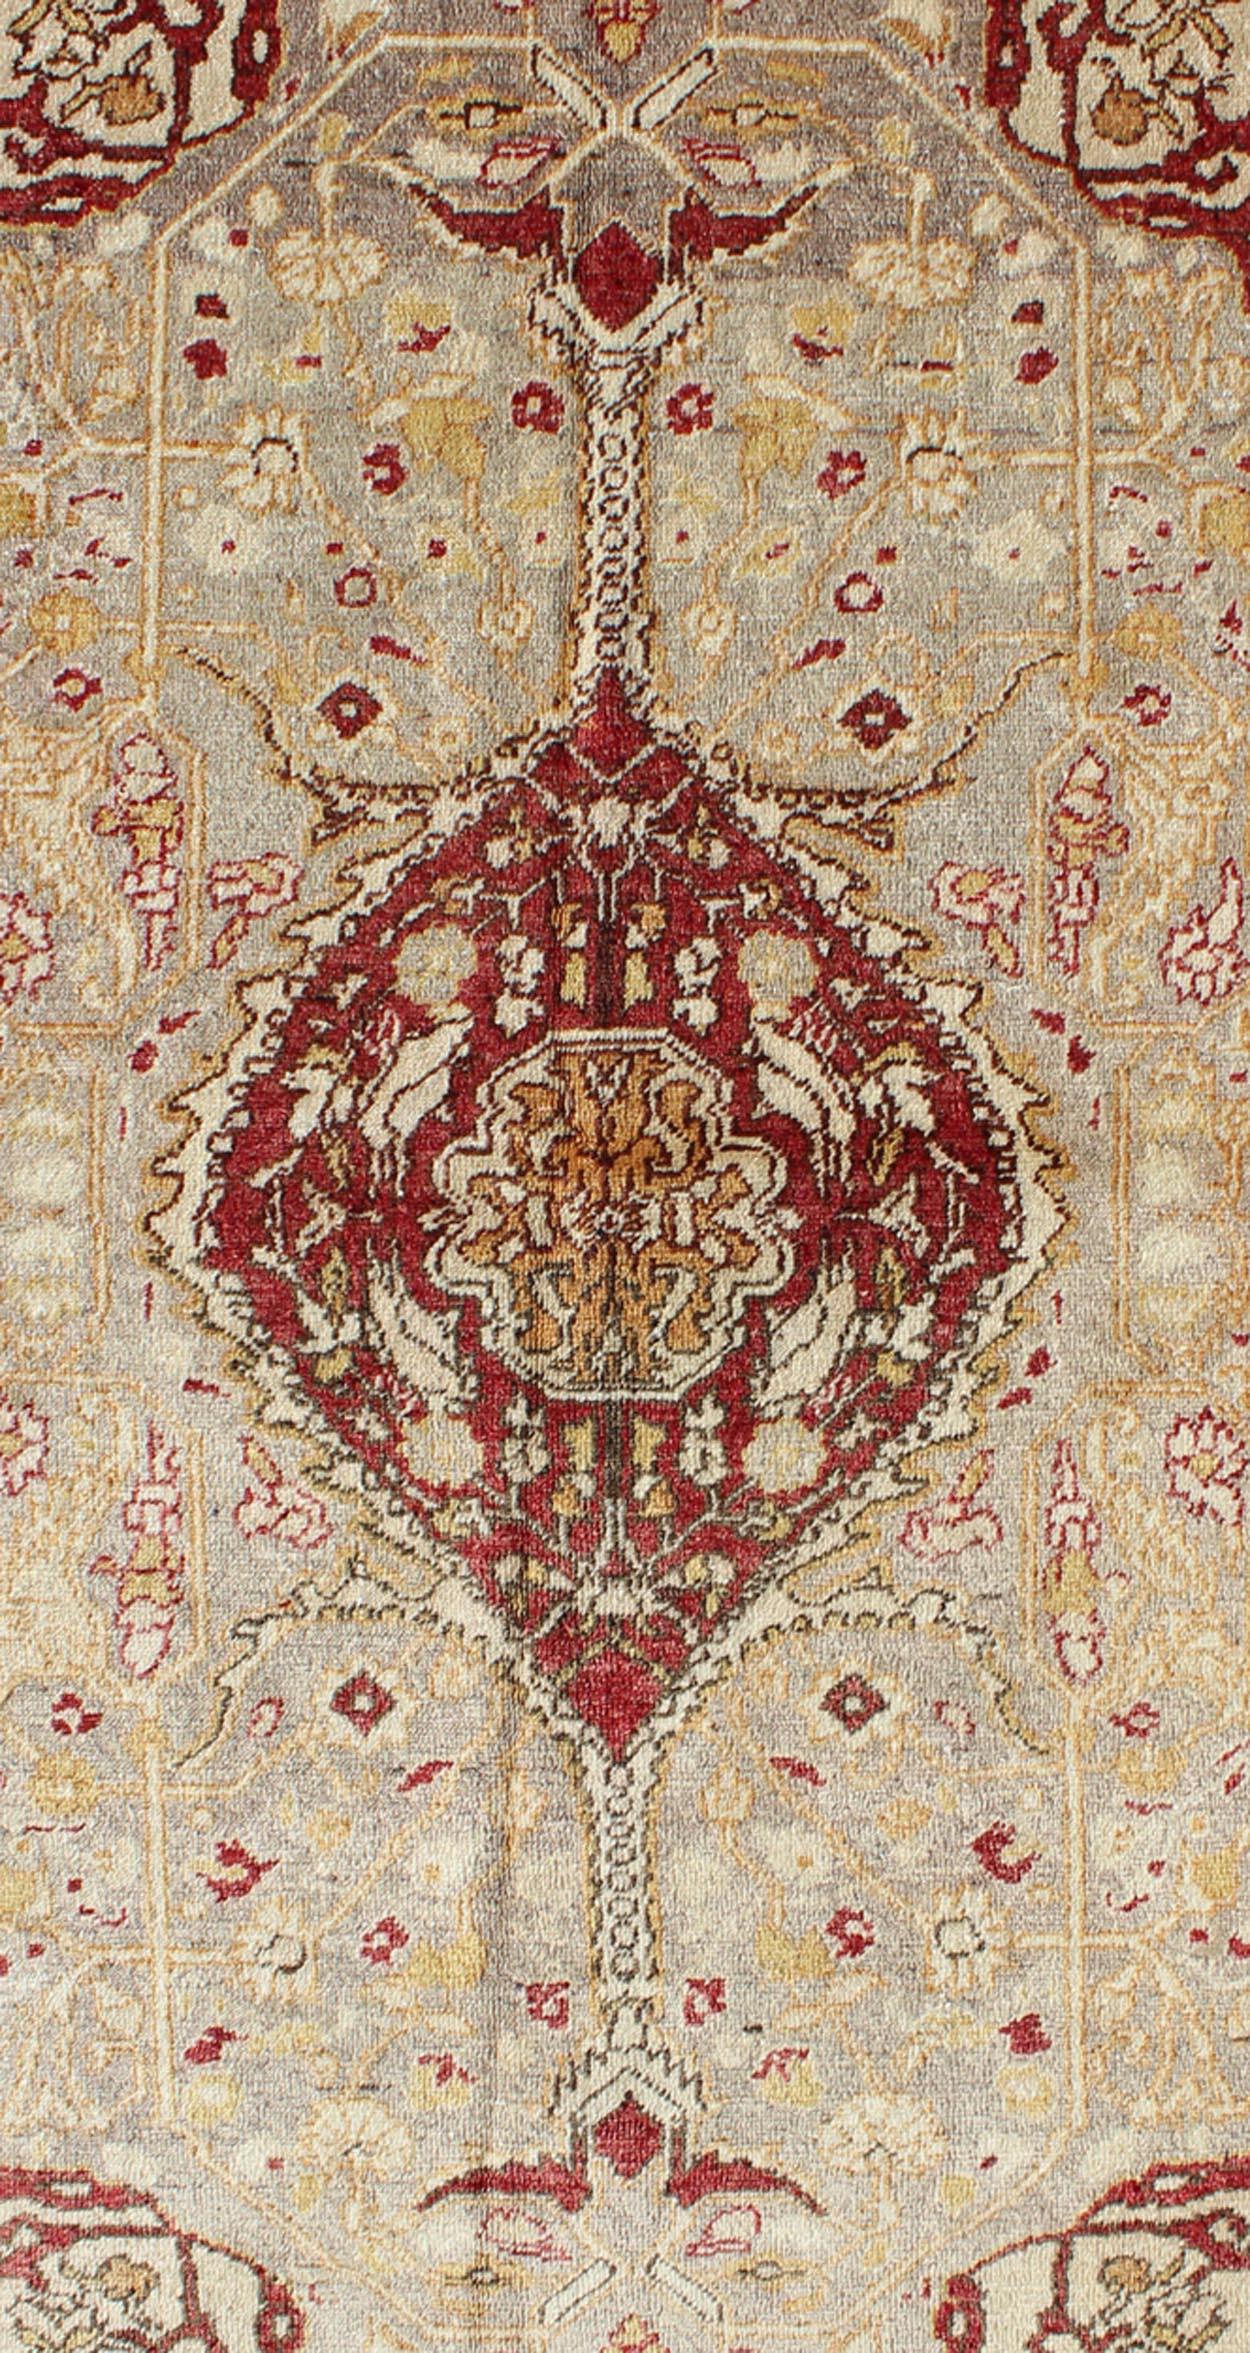 Vintage Turkish Medallion Oushak Area Rug in Red, Taupe, Gold, and Cocoa In Good Condition For Sale In Atlanta, GA